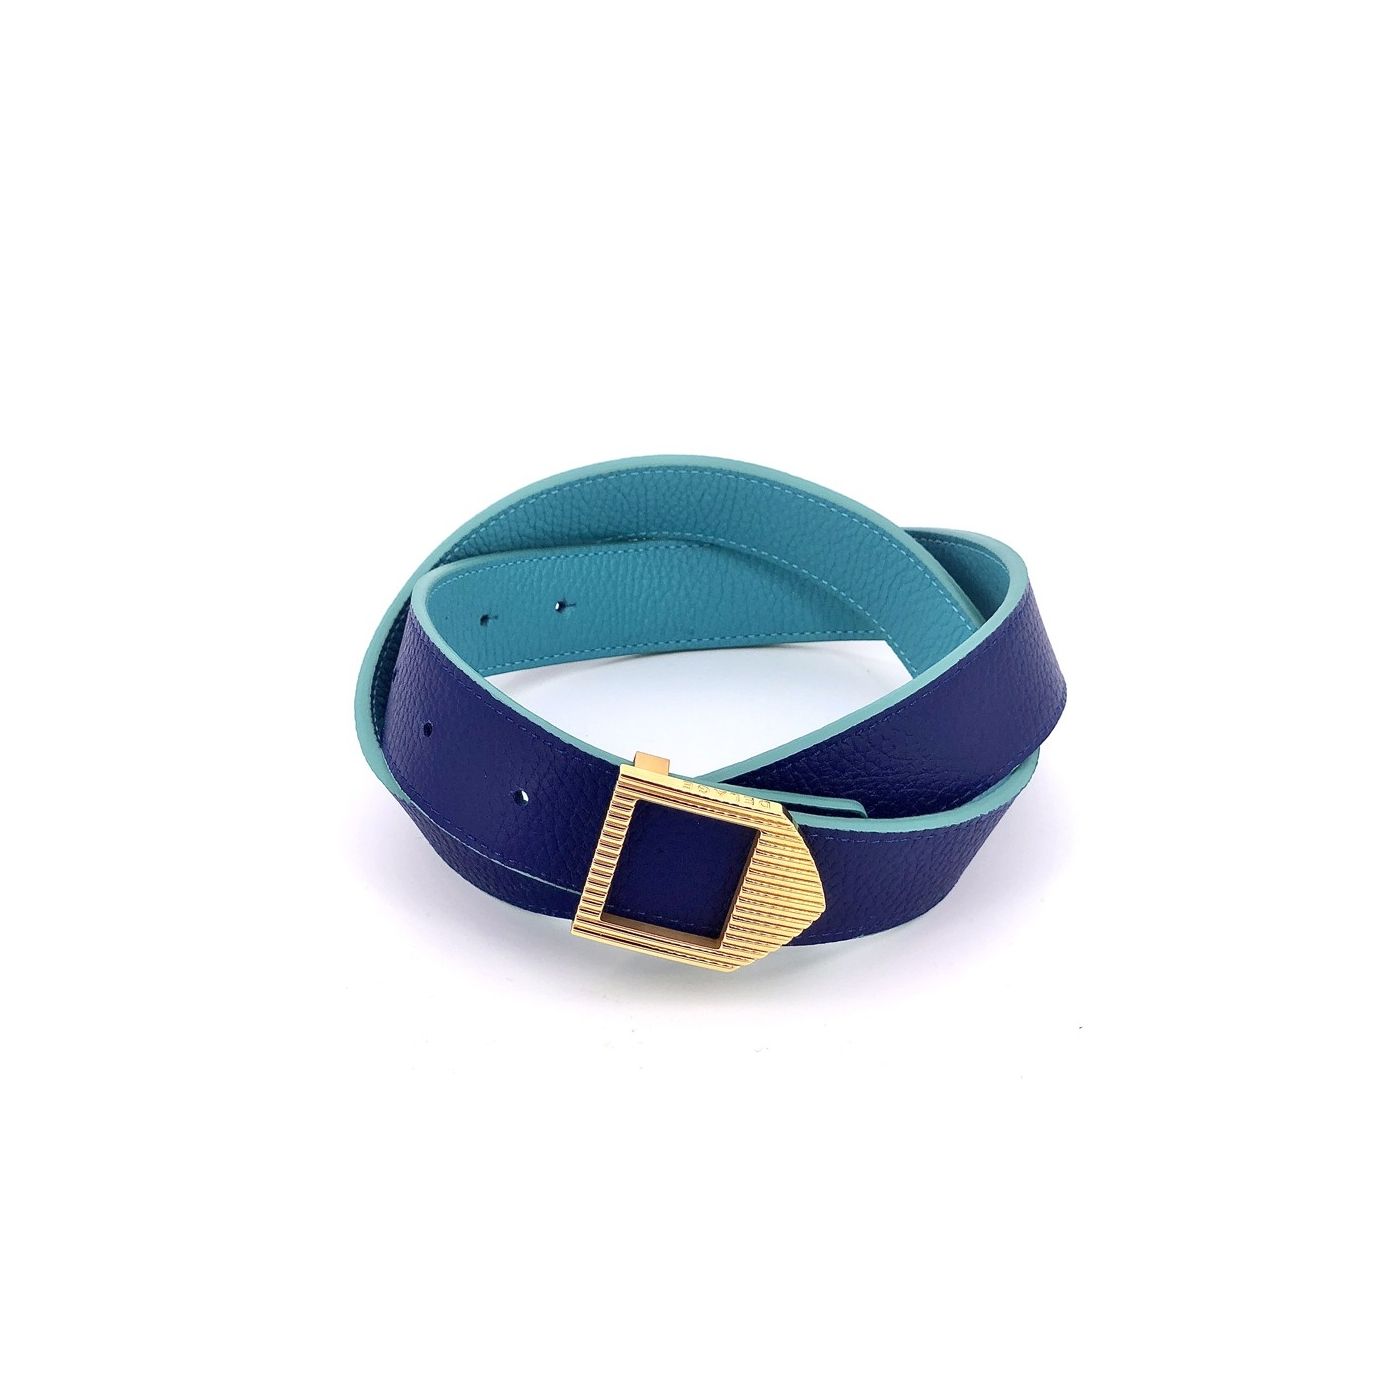 Reversible leather belt turquoise & blue / gold buckle